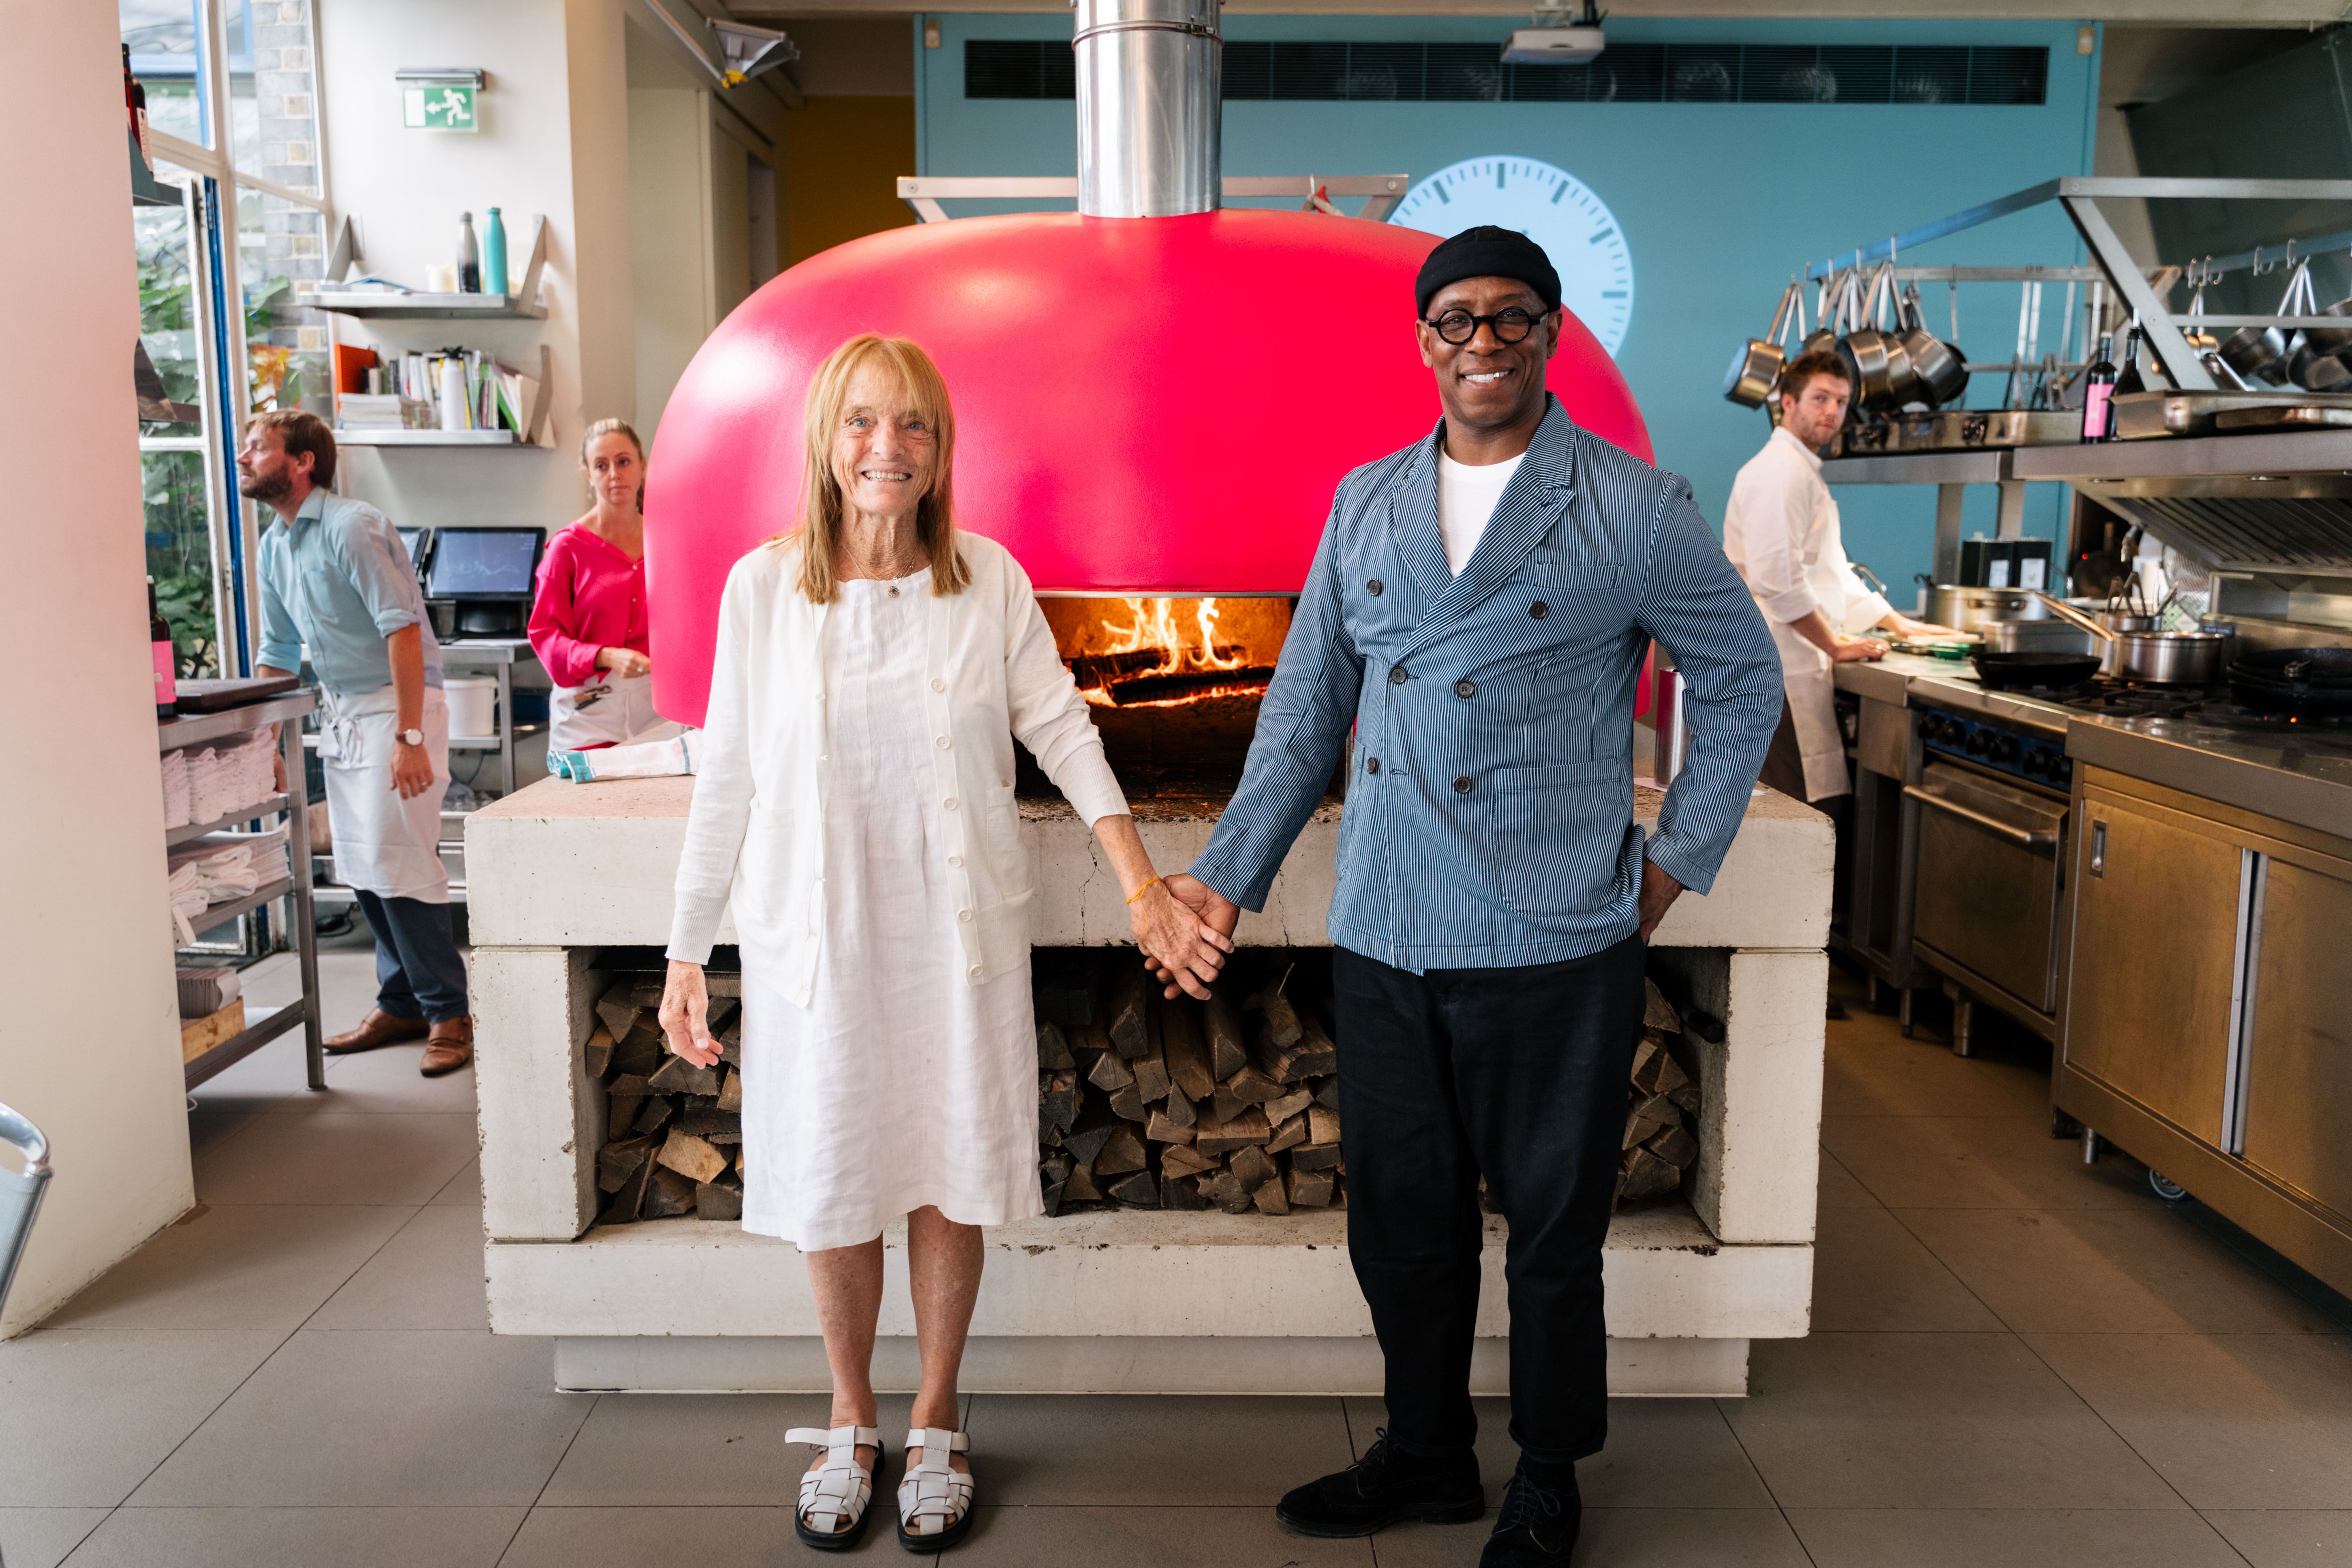 Ruthie Rogers and Ian Wright stood in front of a pink pizza oven